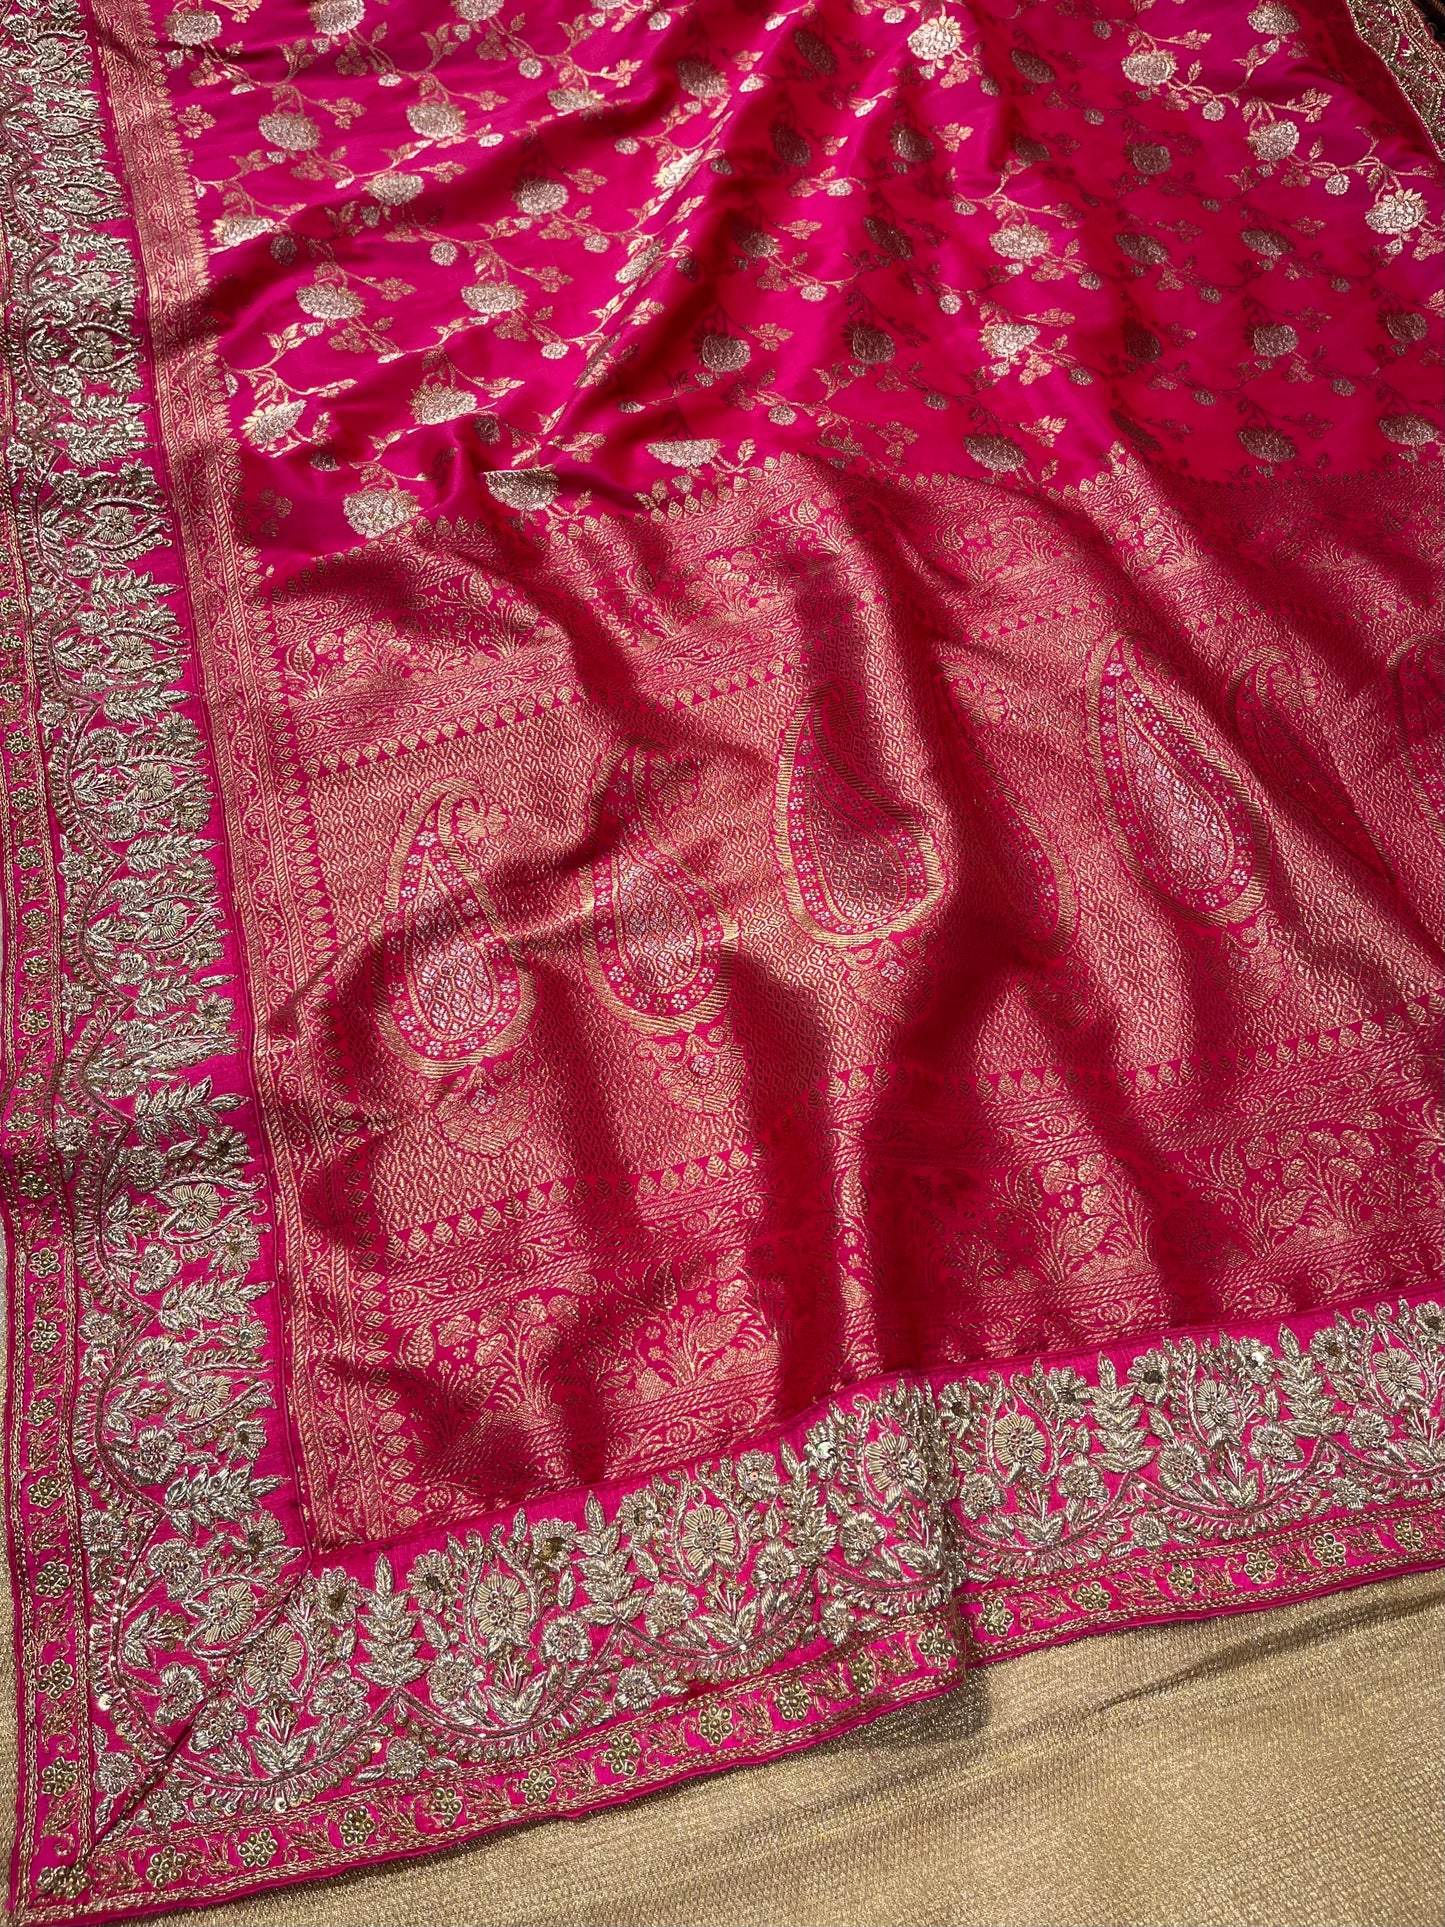 ( DELIVERY IN 25 DAYS ) HOT PINK COLOUR BANARASI SILK EMBROIDERED SAREE EMBELLISHED WITH ZARDOZI WORK